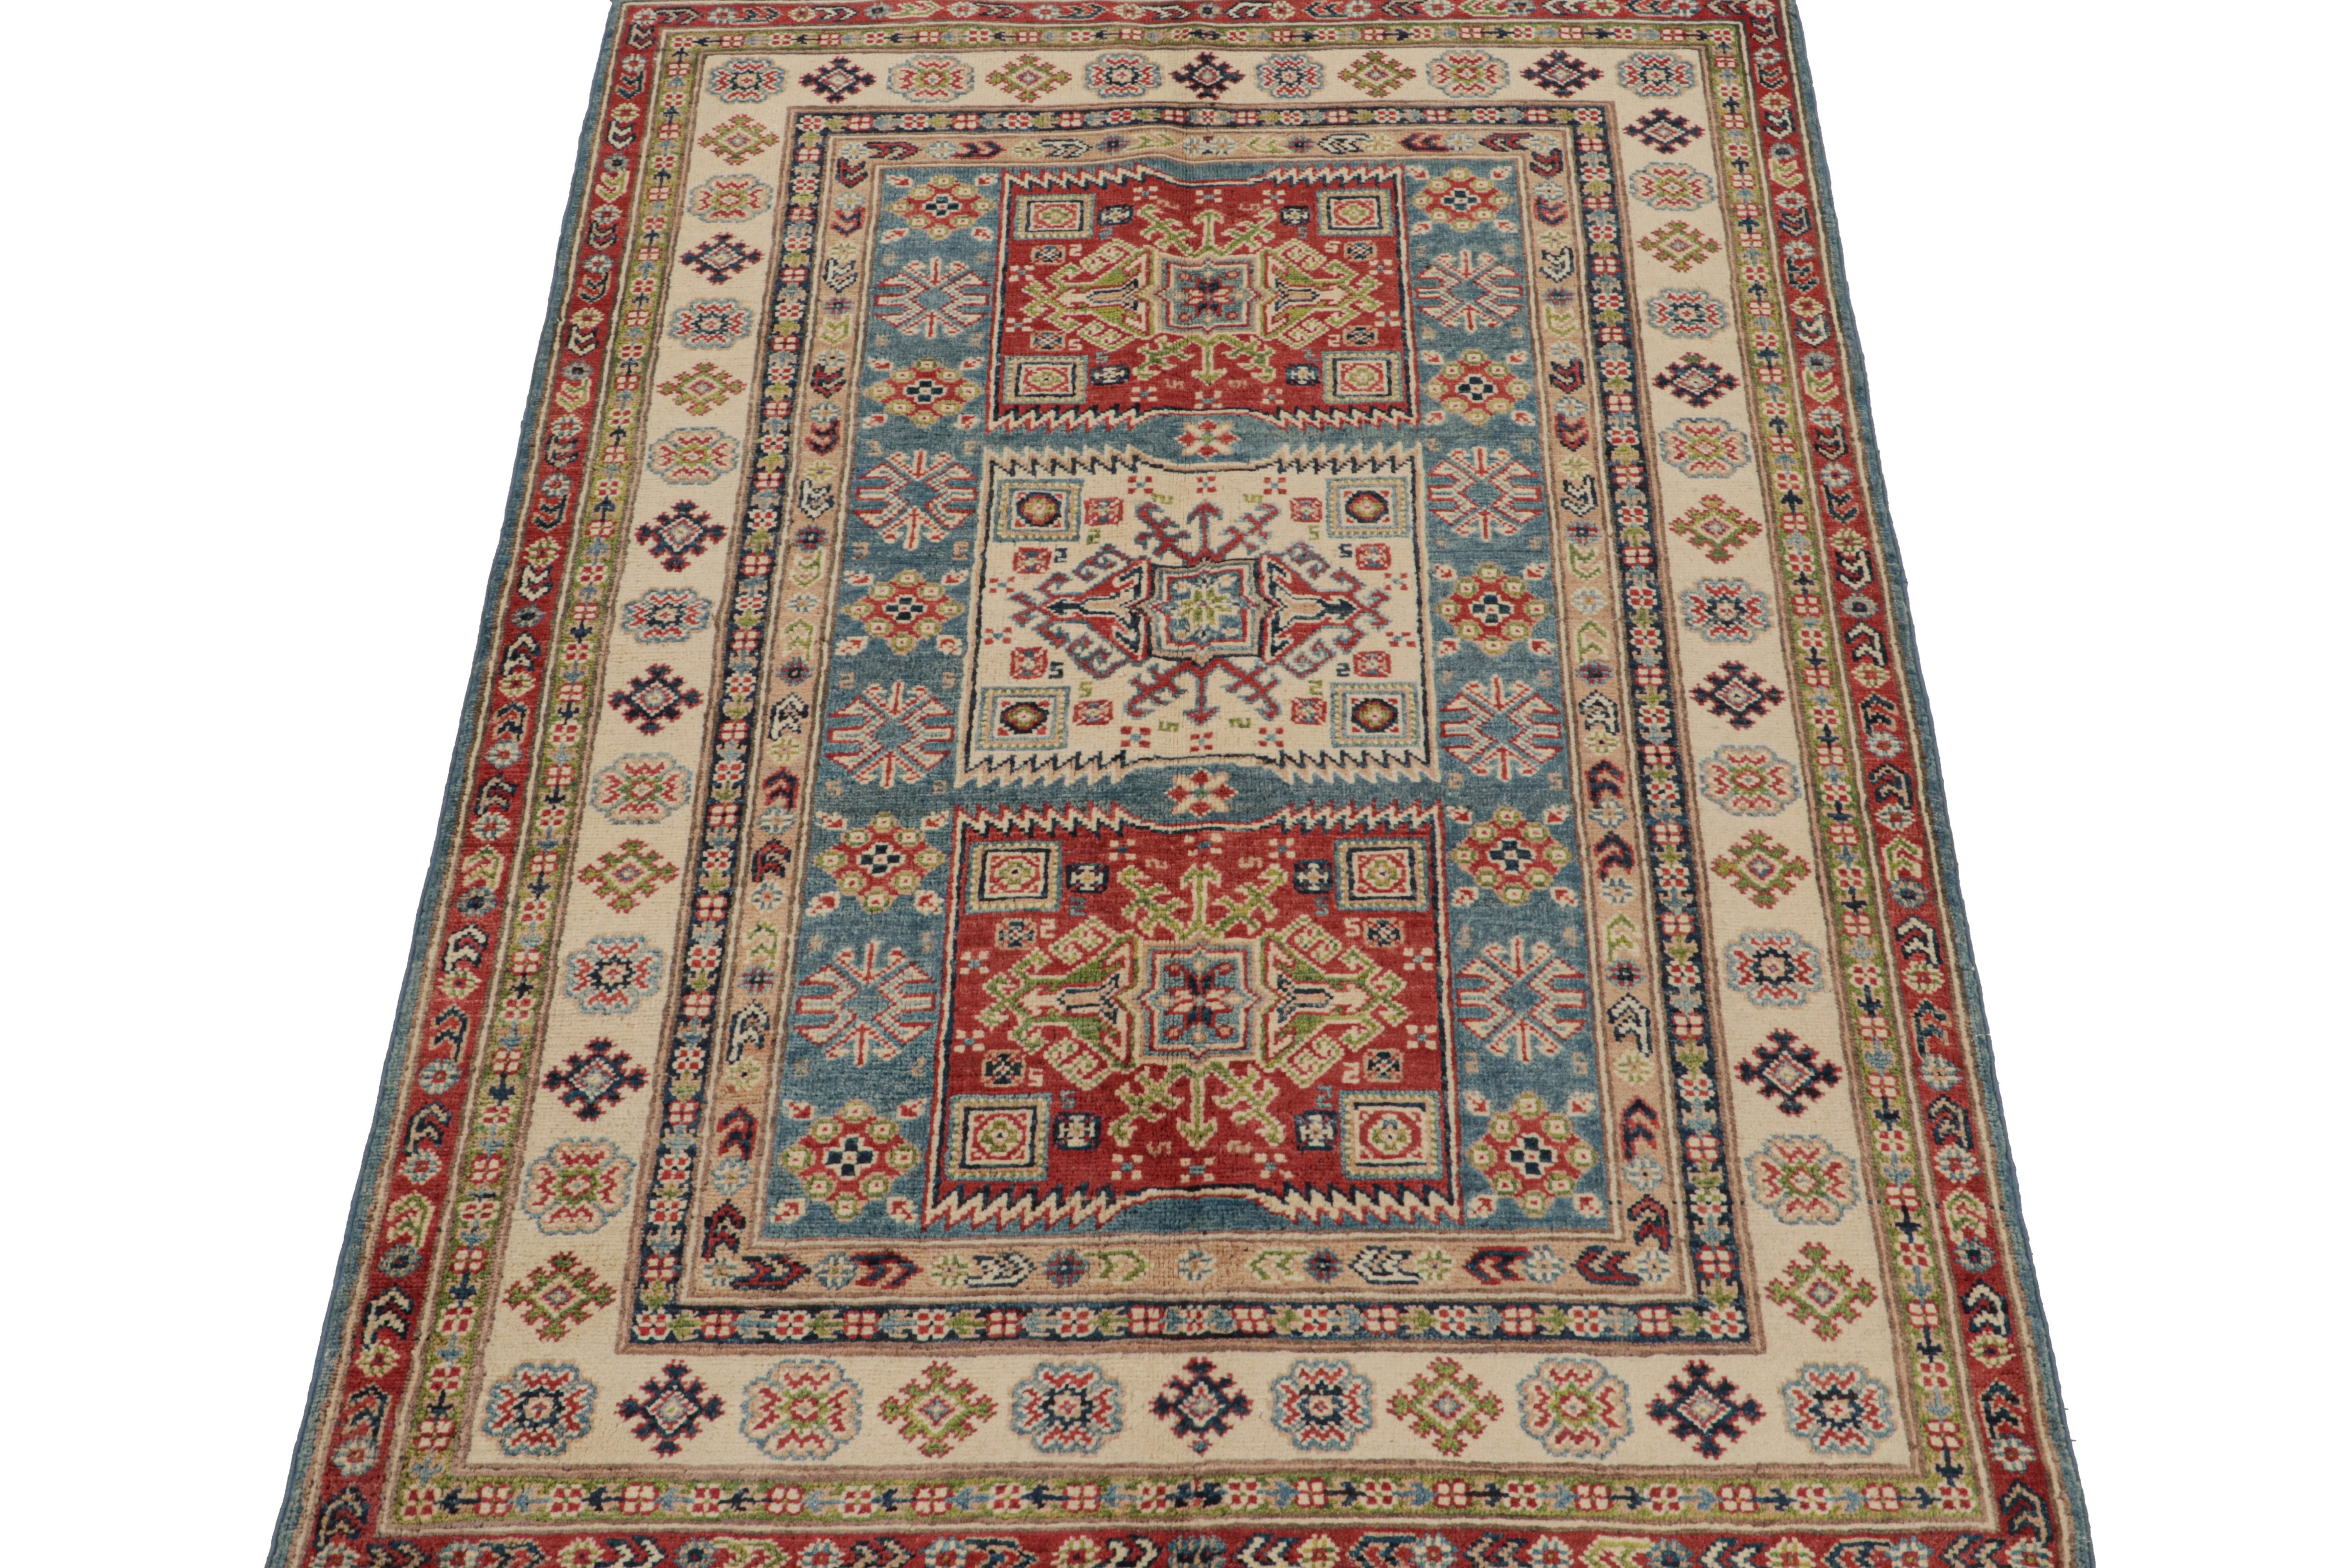 Tribal Rug & Kilim’s Kazak style rug in Red, Blue and Beige-Brown Geometric Patterns For Sale